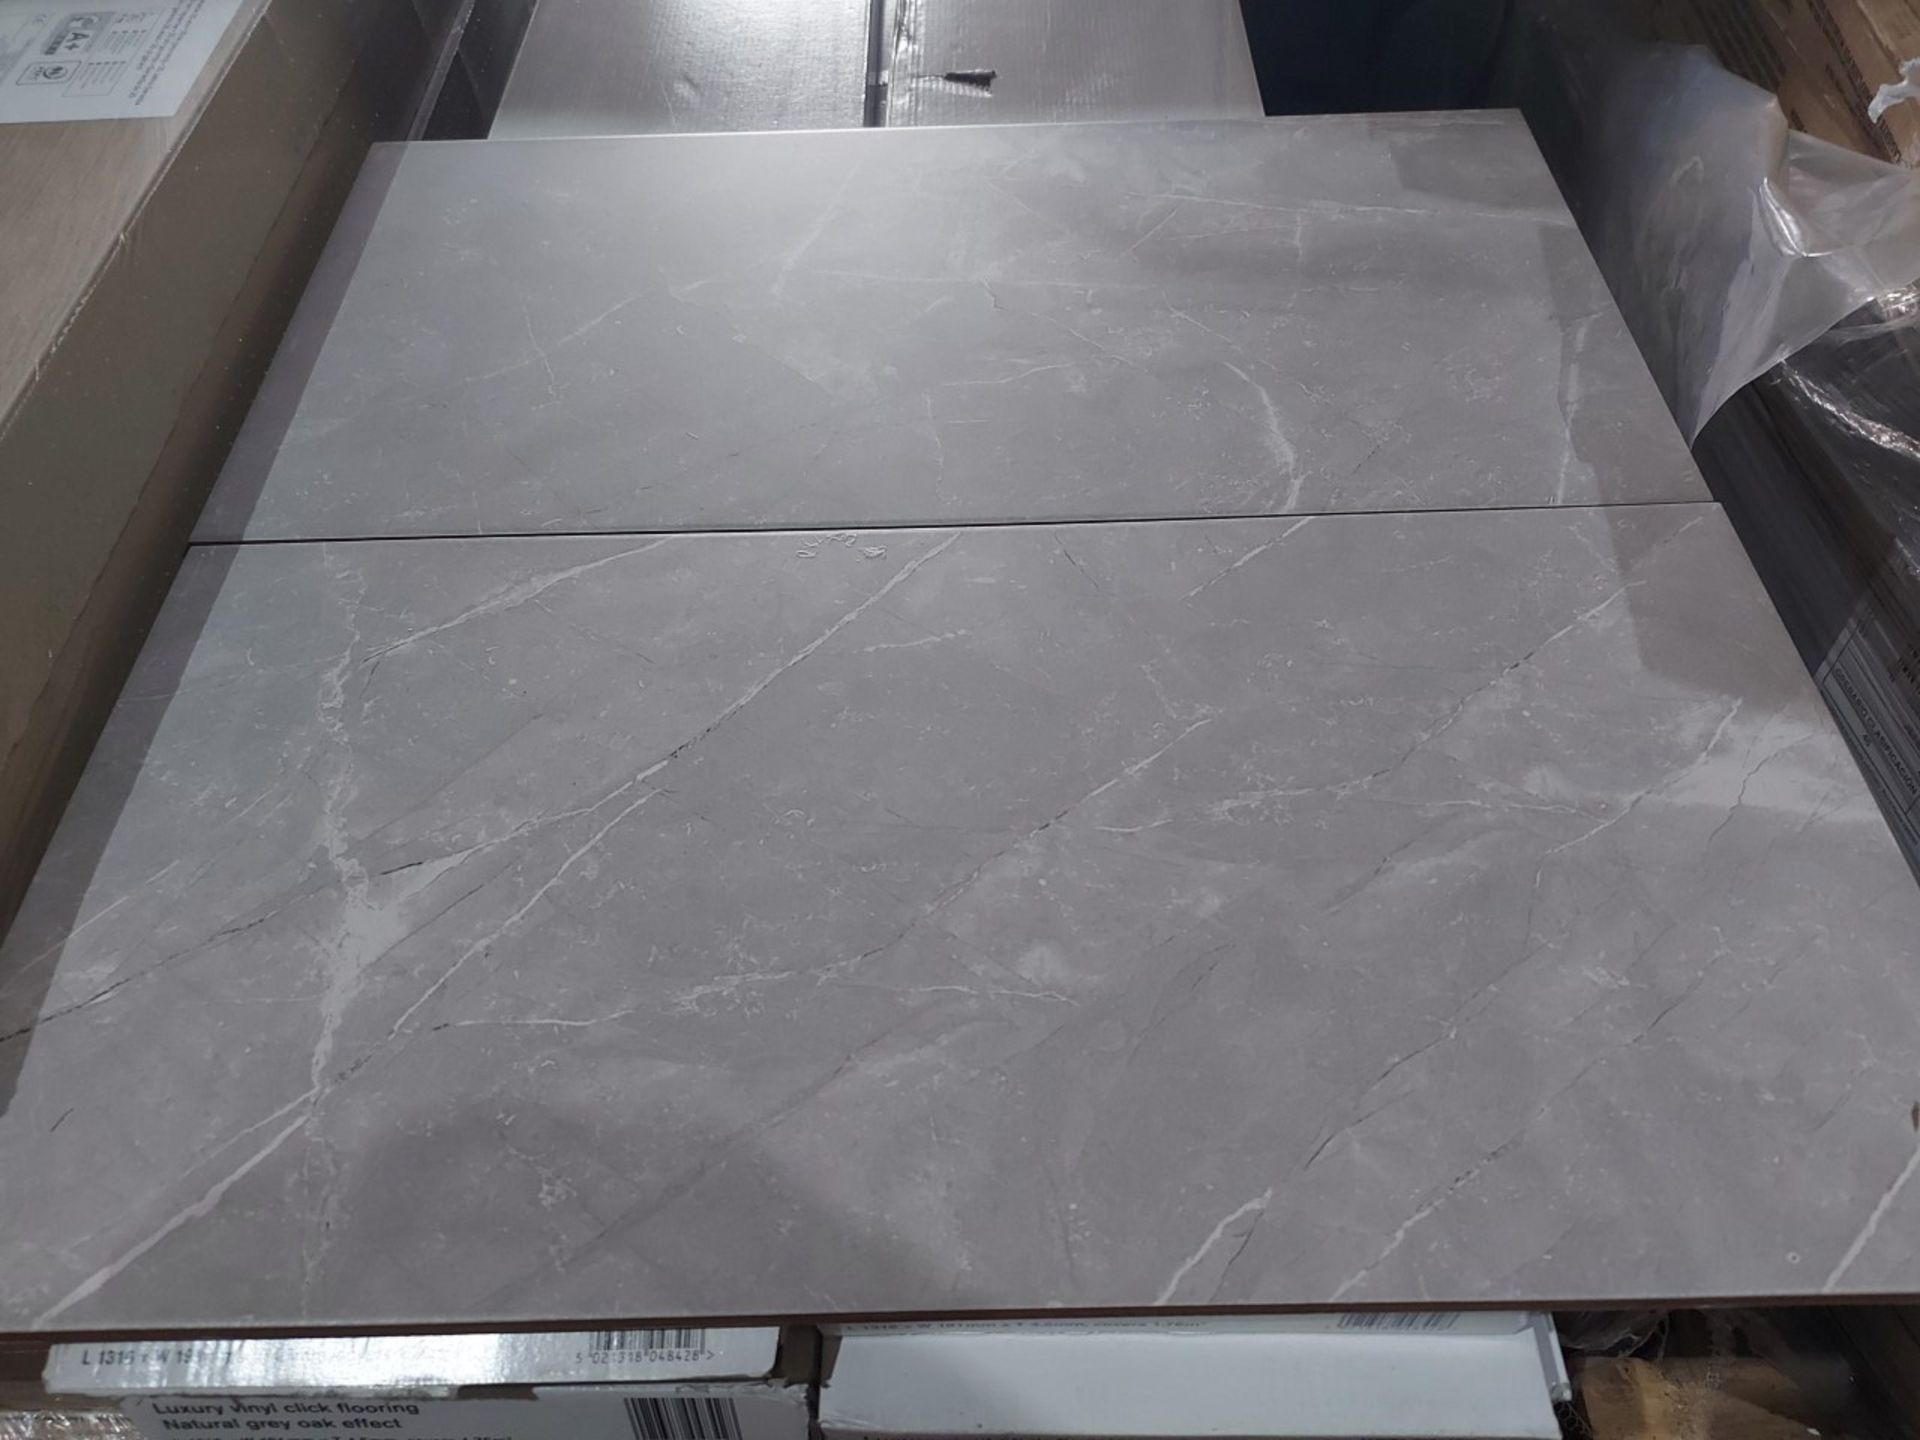 NEW PACKAGED 11.88m2 OF KILLINGTON GREY GLAZED CERAMIC WALL AND FLOOR TILES. 300x600MM. 9MM THICK - Image 2 of 2